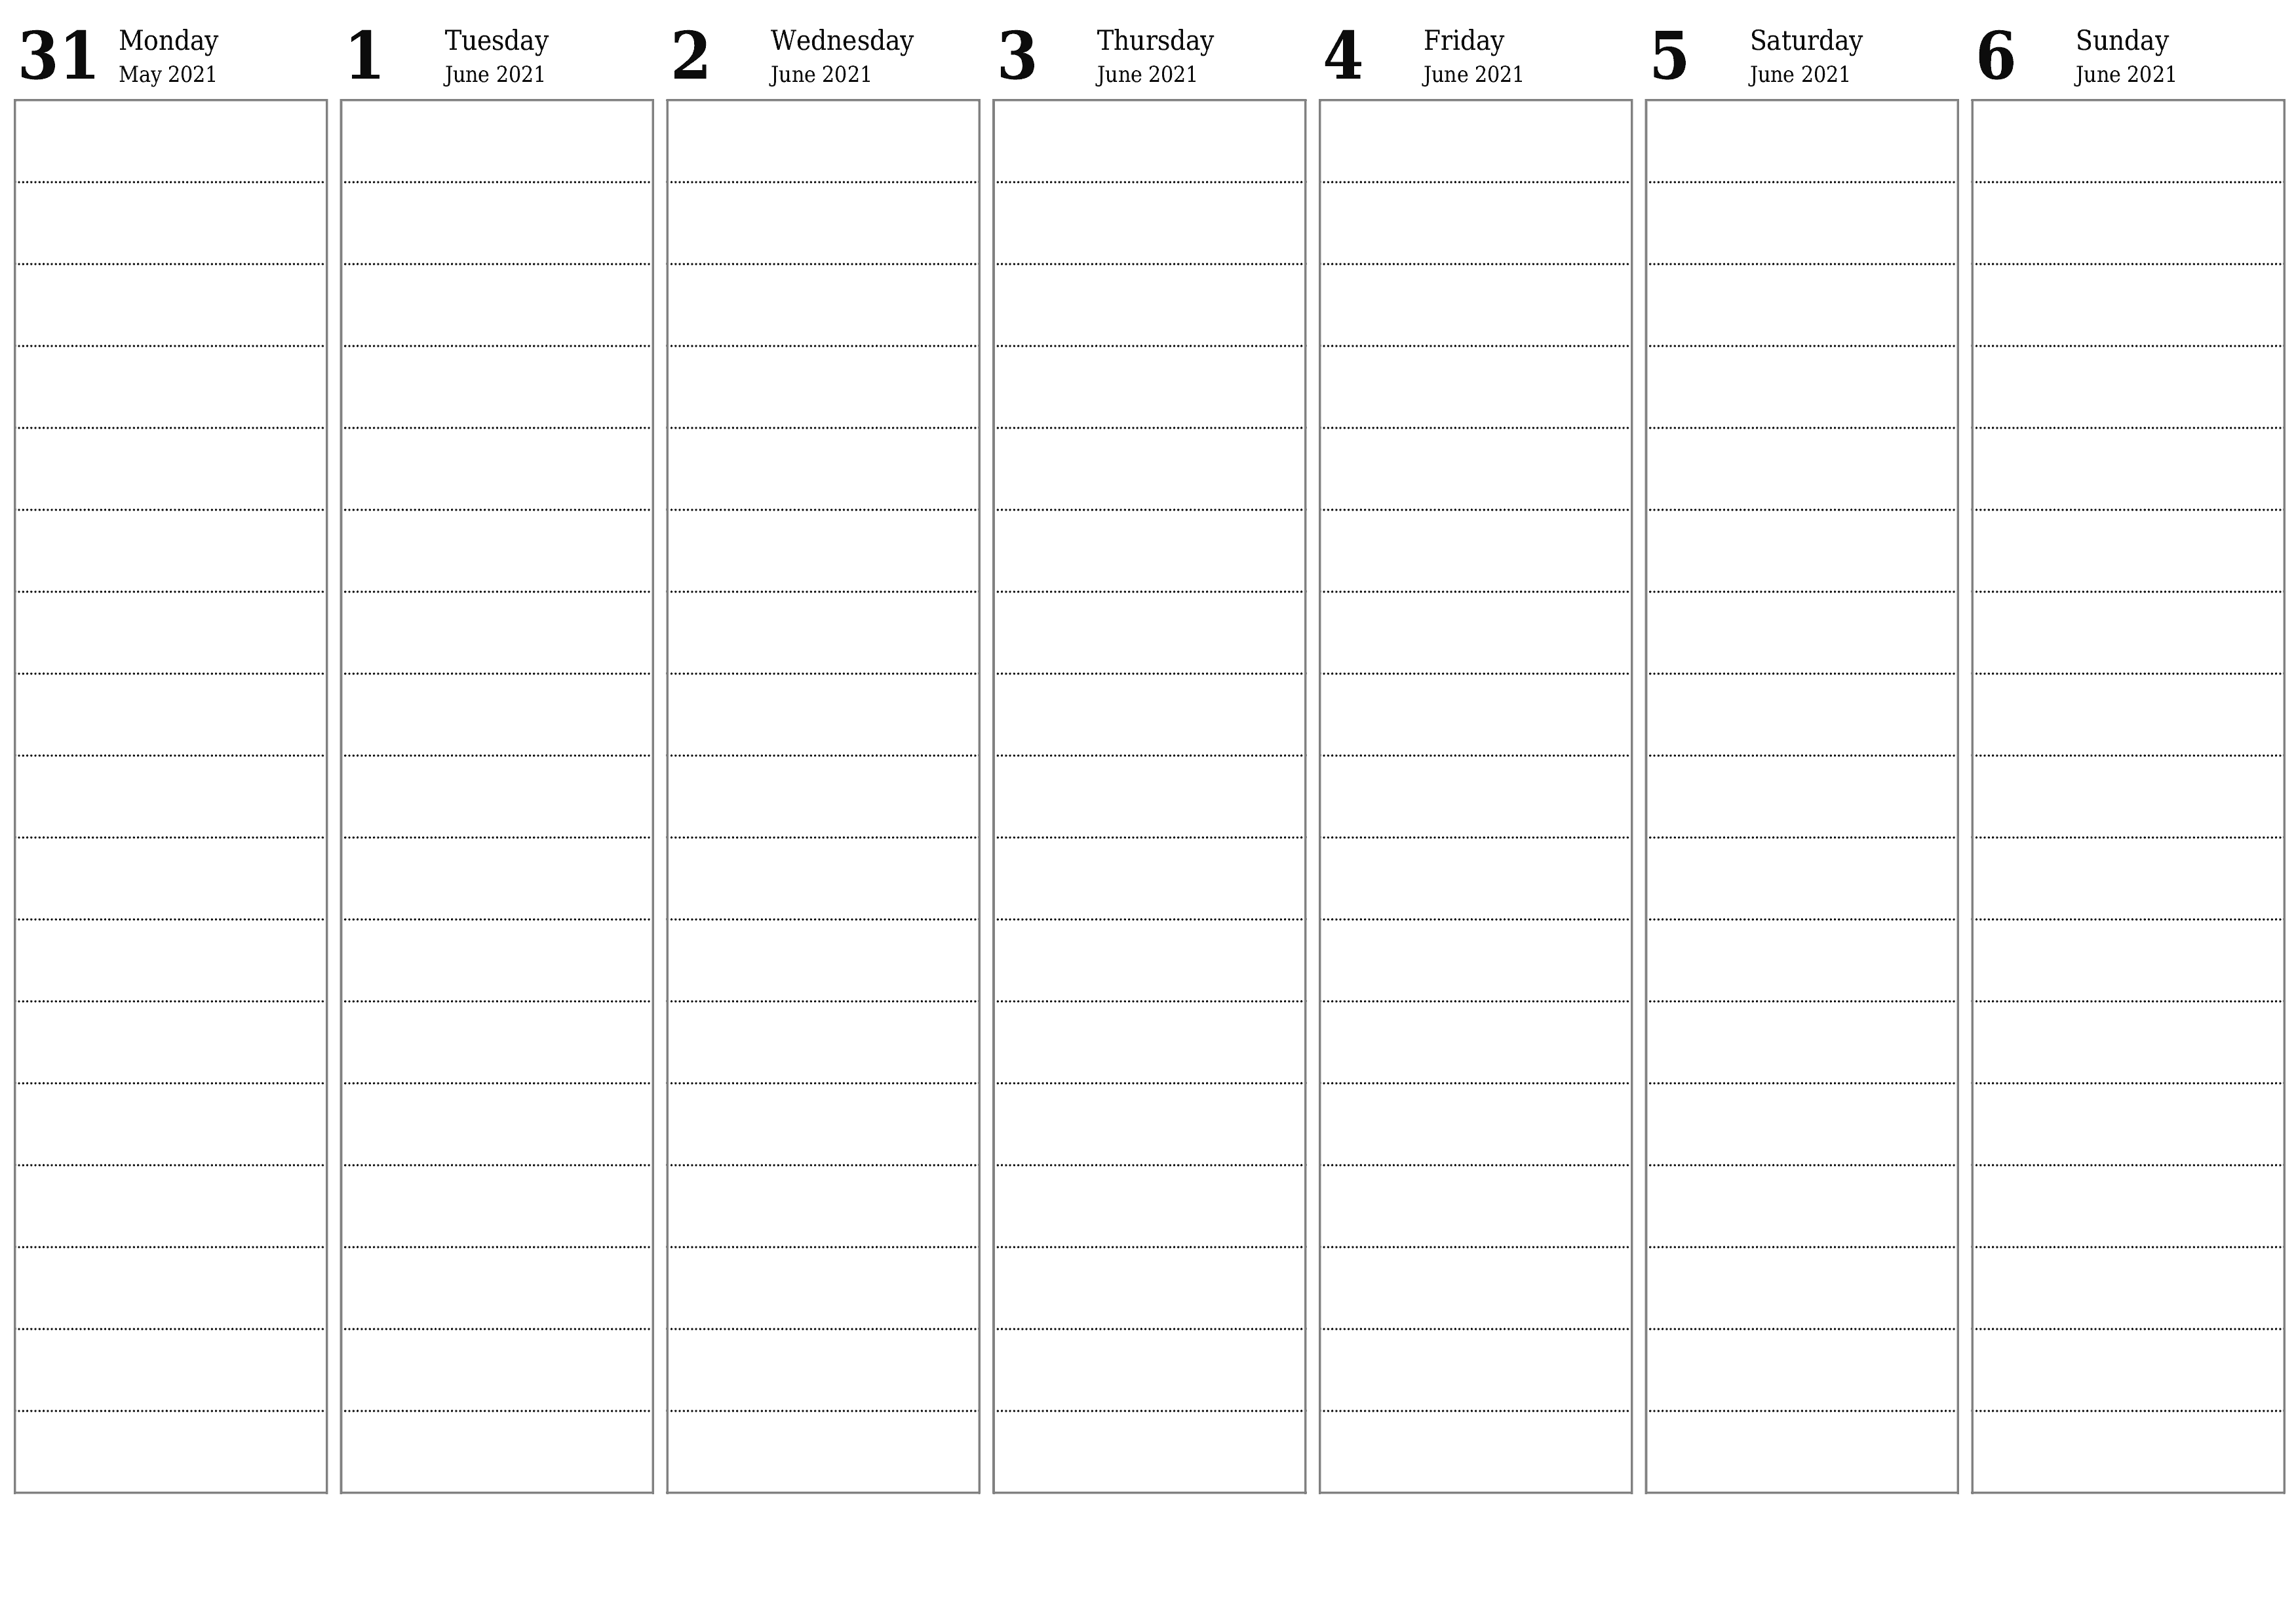 Blank weekly printable calendar and planner for week June 2021 with notes, save and print to PDF PNG English